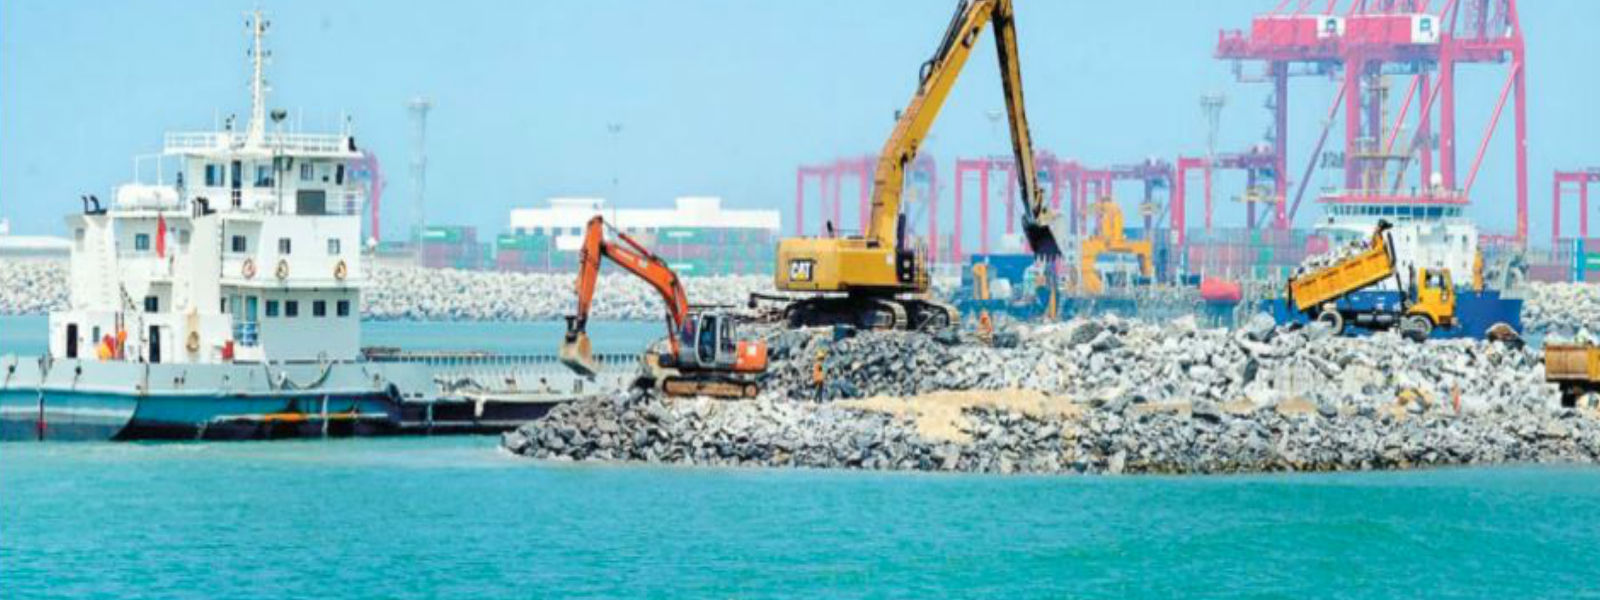 Land reclamation for Colombo Port city ends